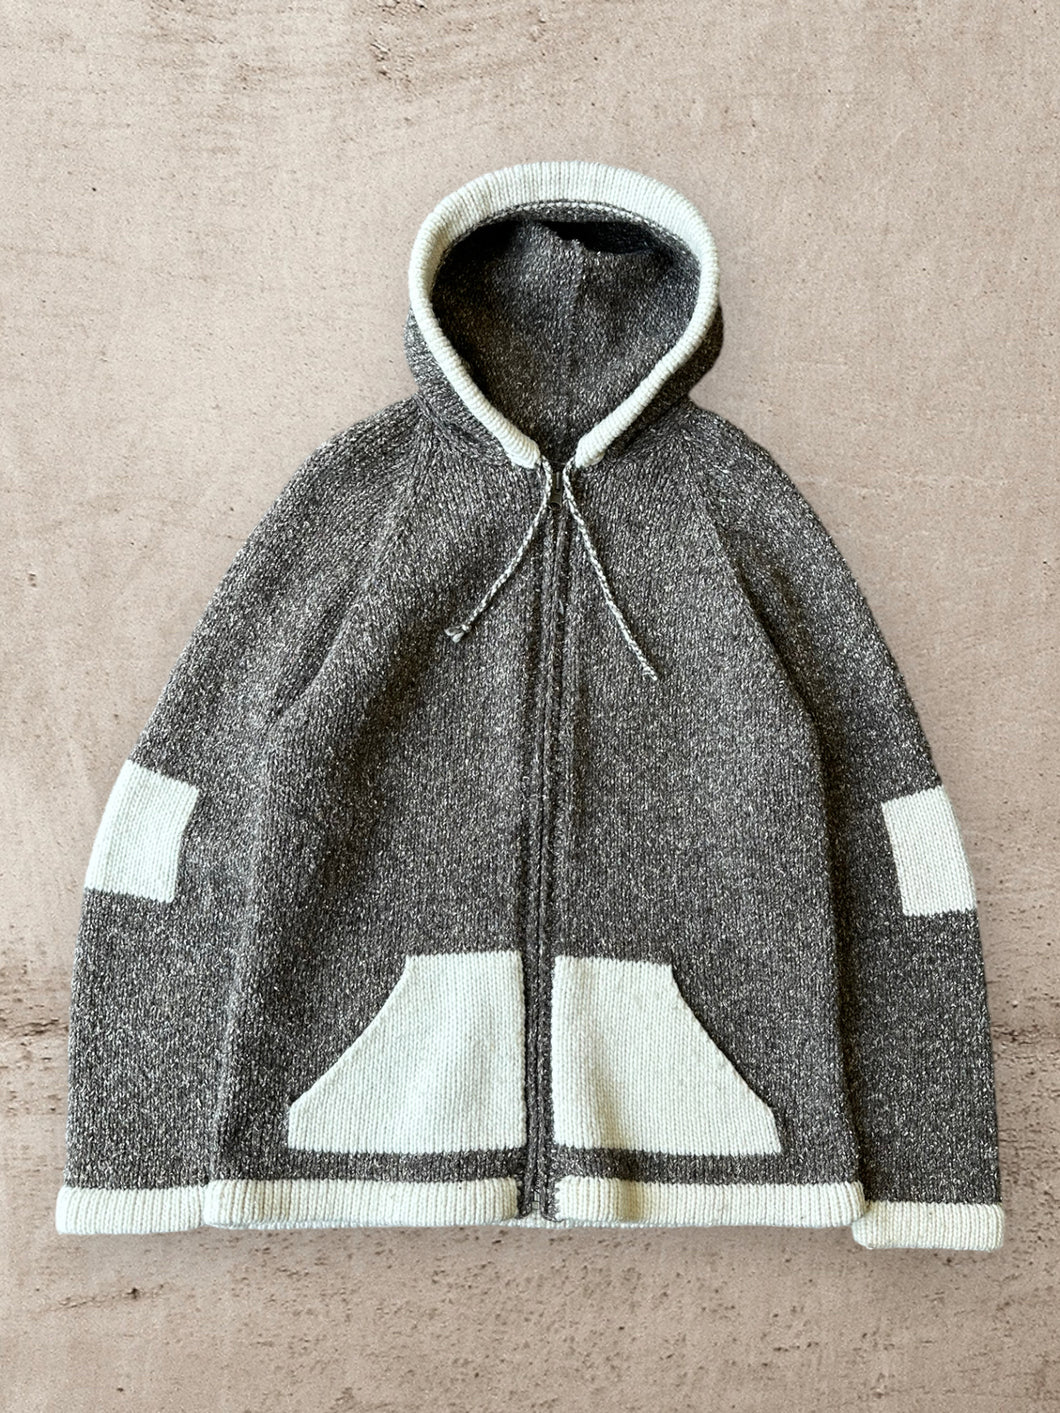 90s Hand knit Colorblock Hoodie - M